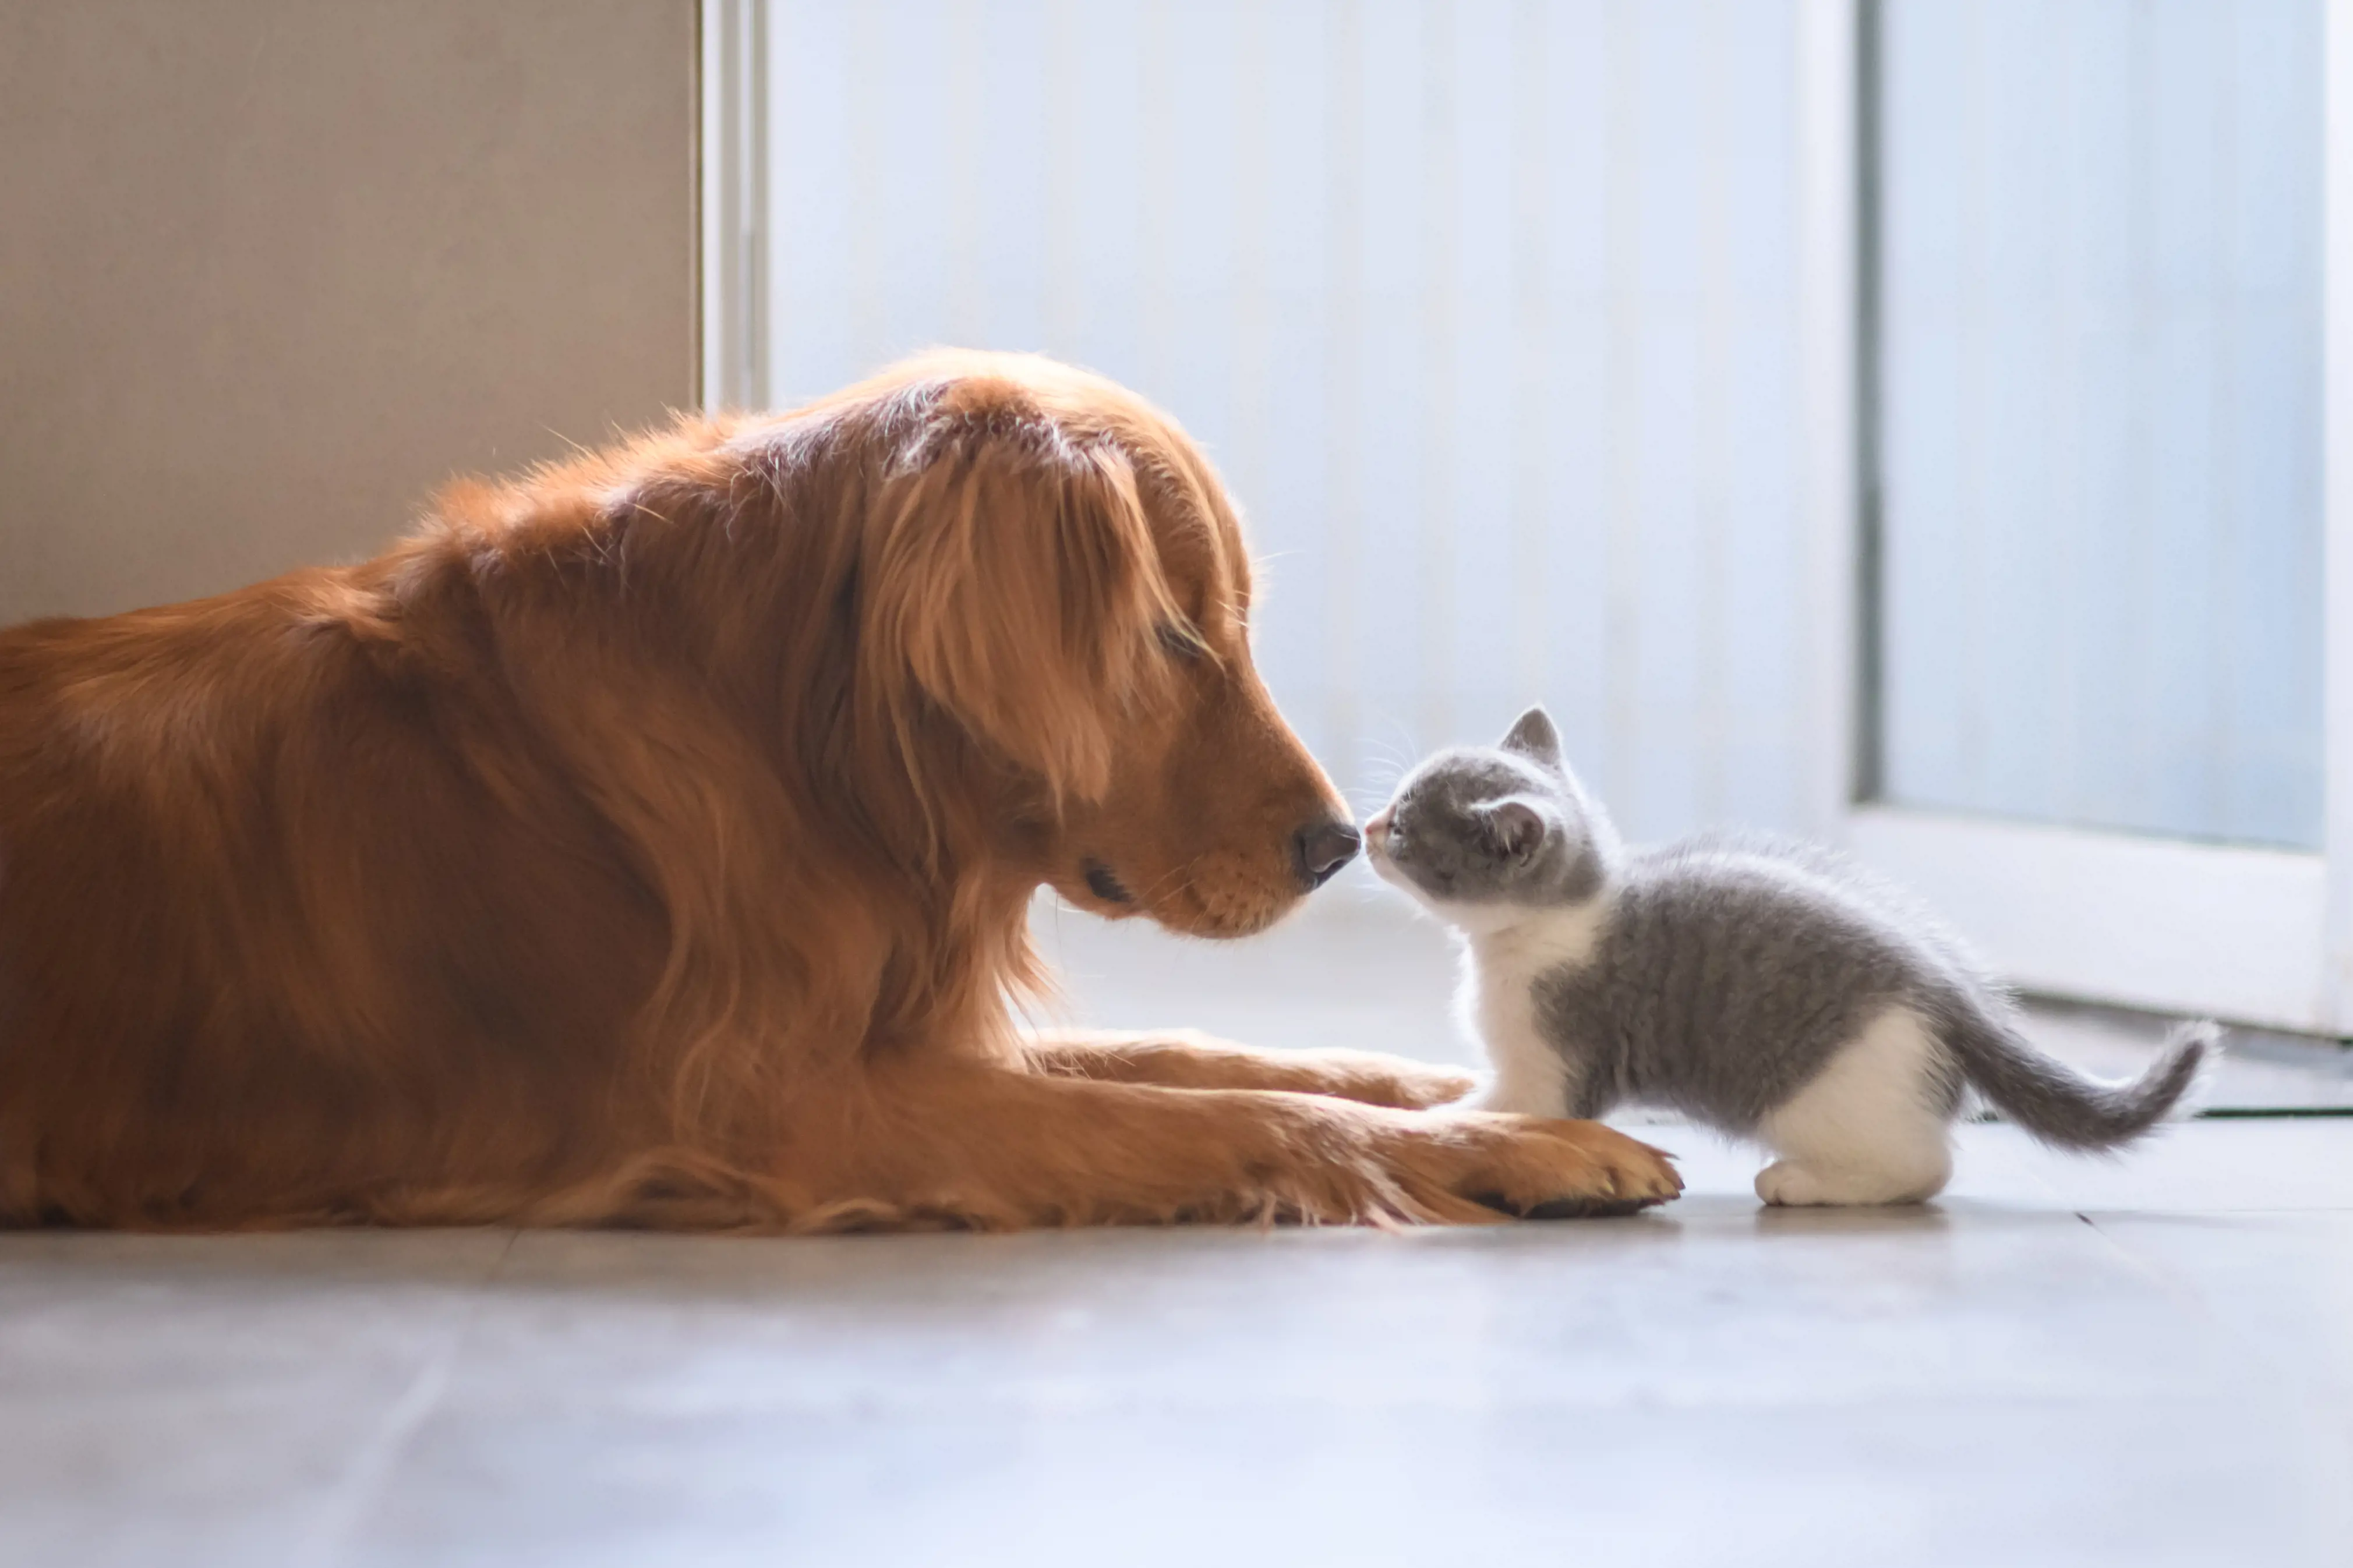 Can cats and dogs get along? Science says yes